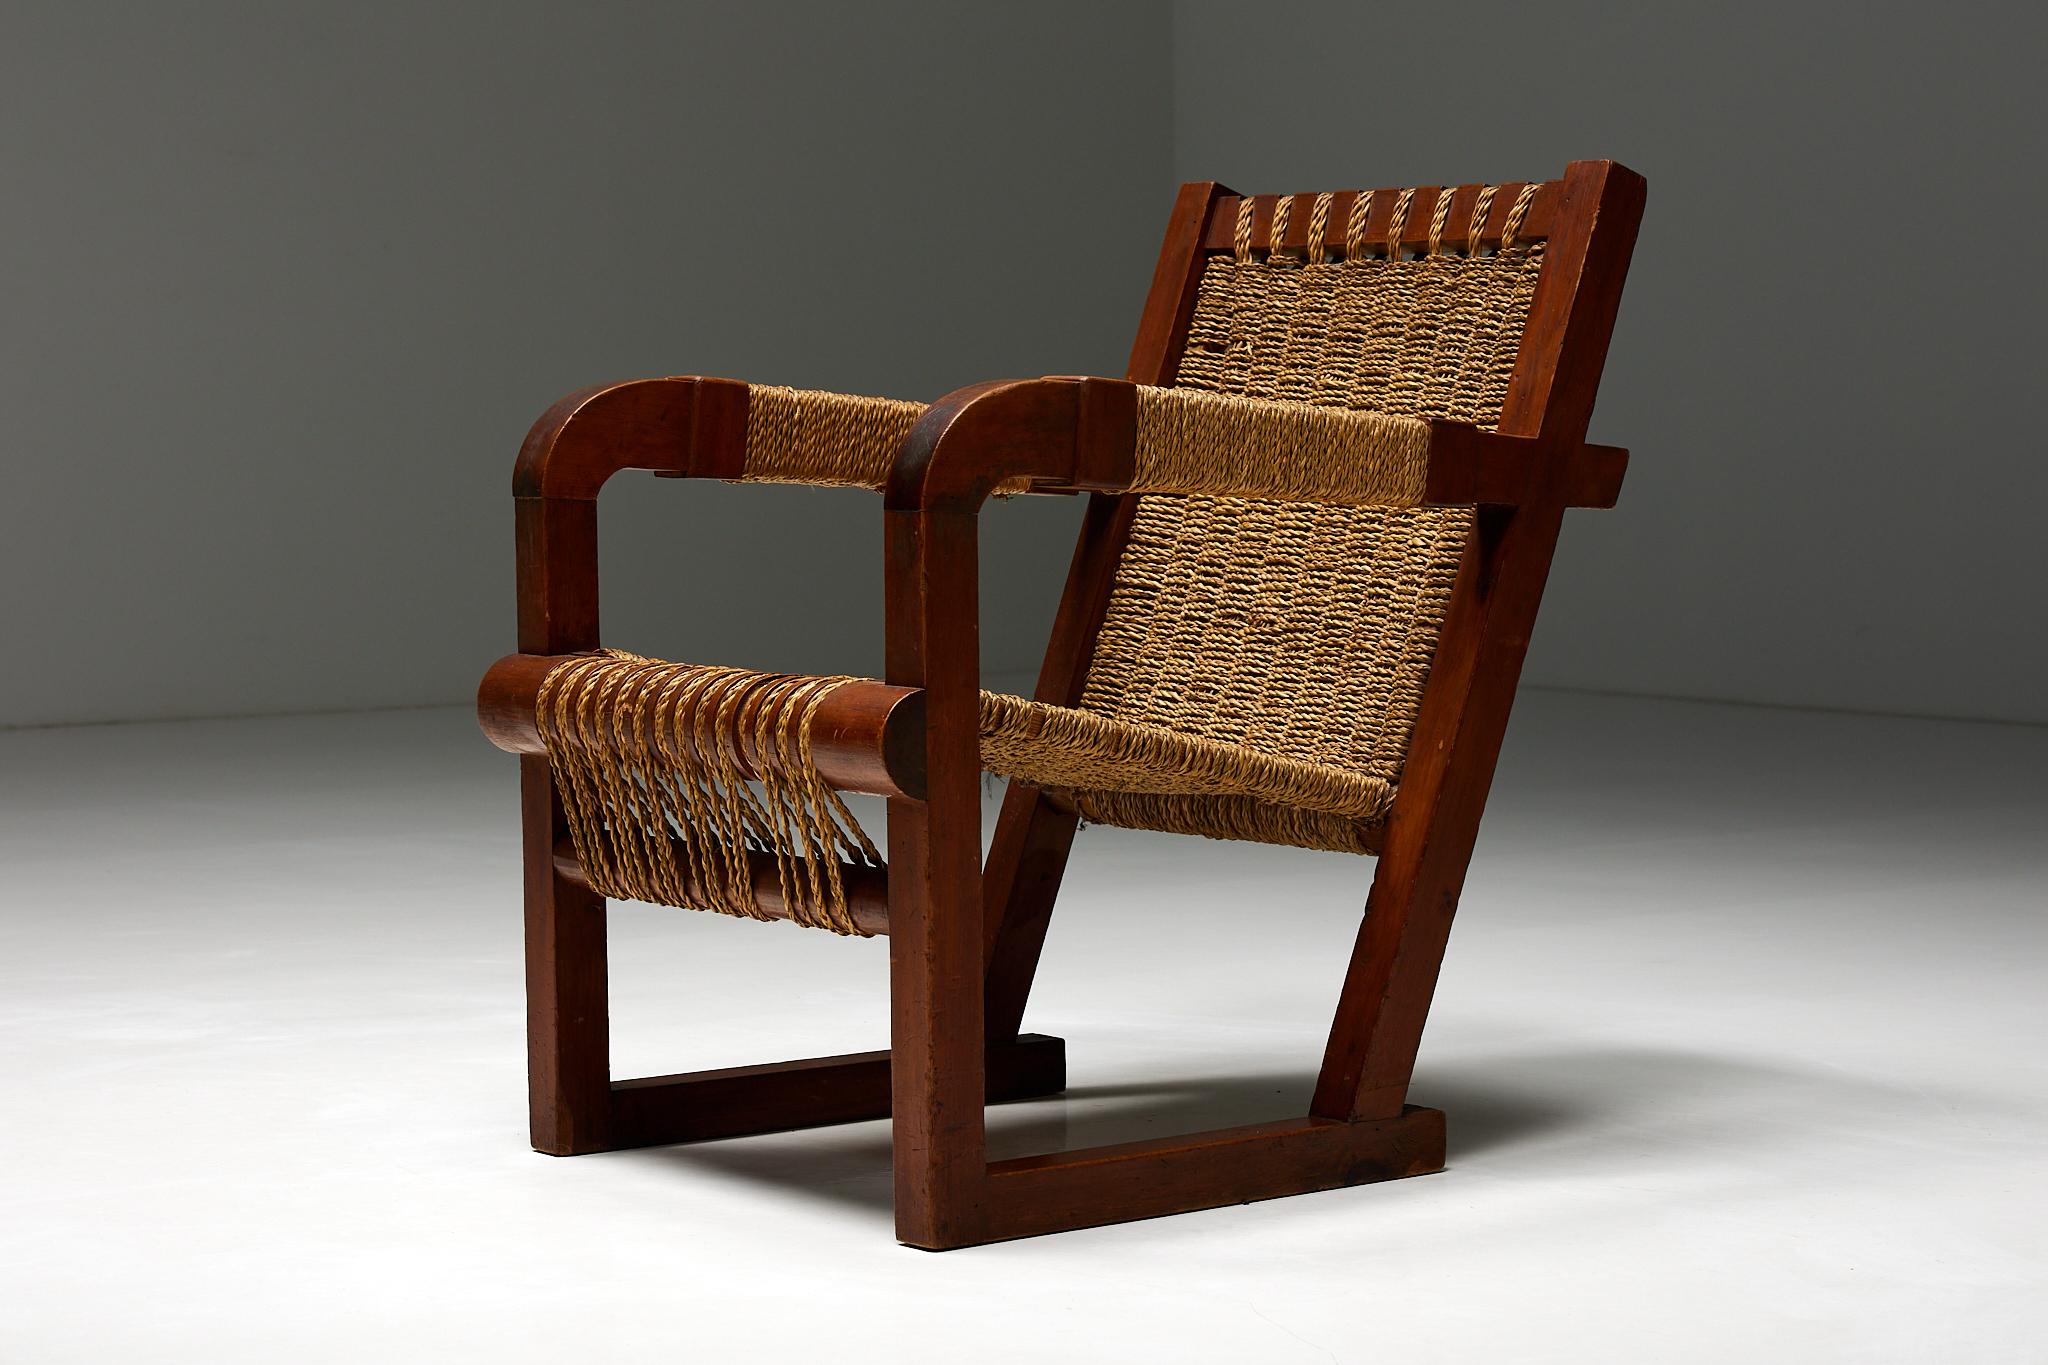 Hand-Woven Easy Chair in Rope and Pitch Pine, France, 1930s